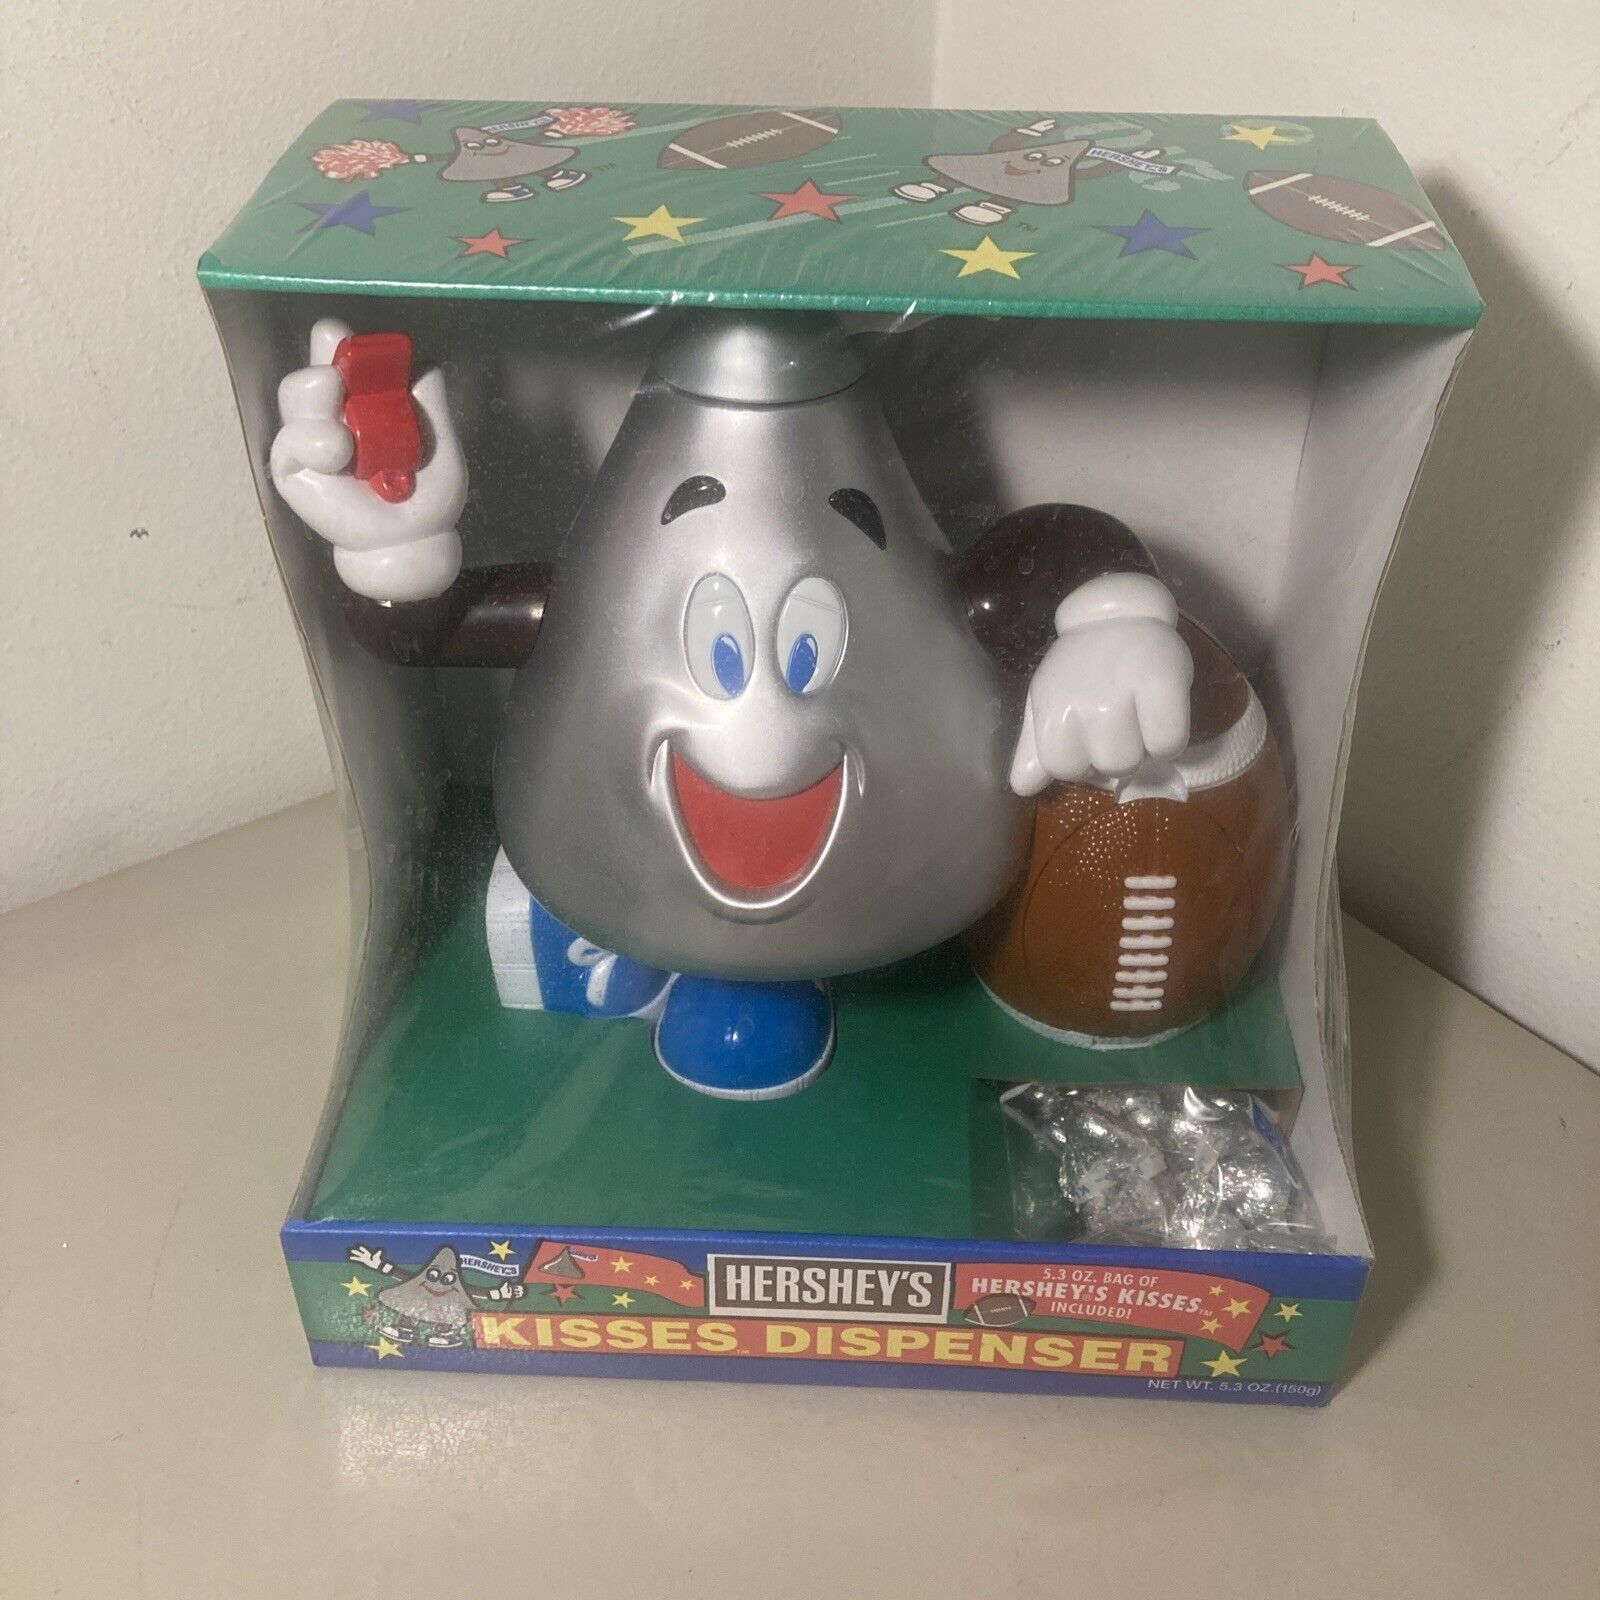 Hershey’s Kisses Dispenser Football Collectible Candy Dispenser SHIP FREE